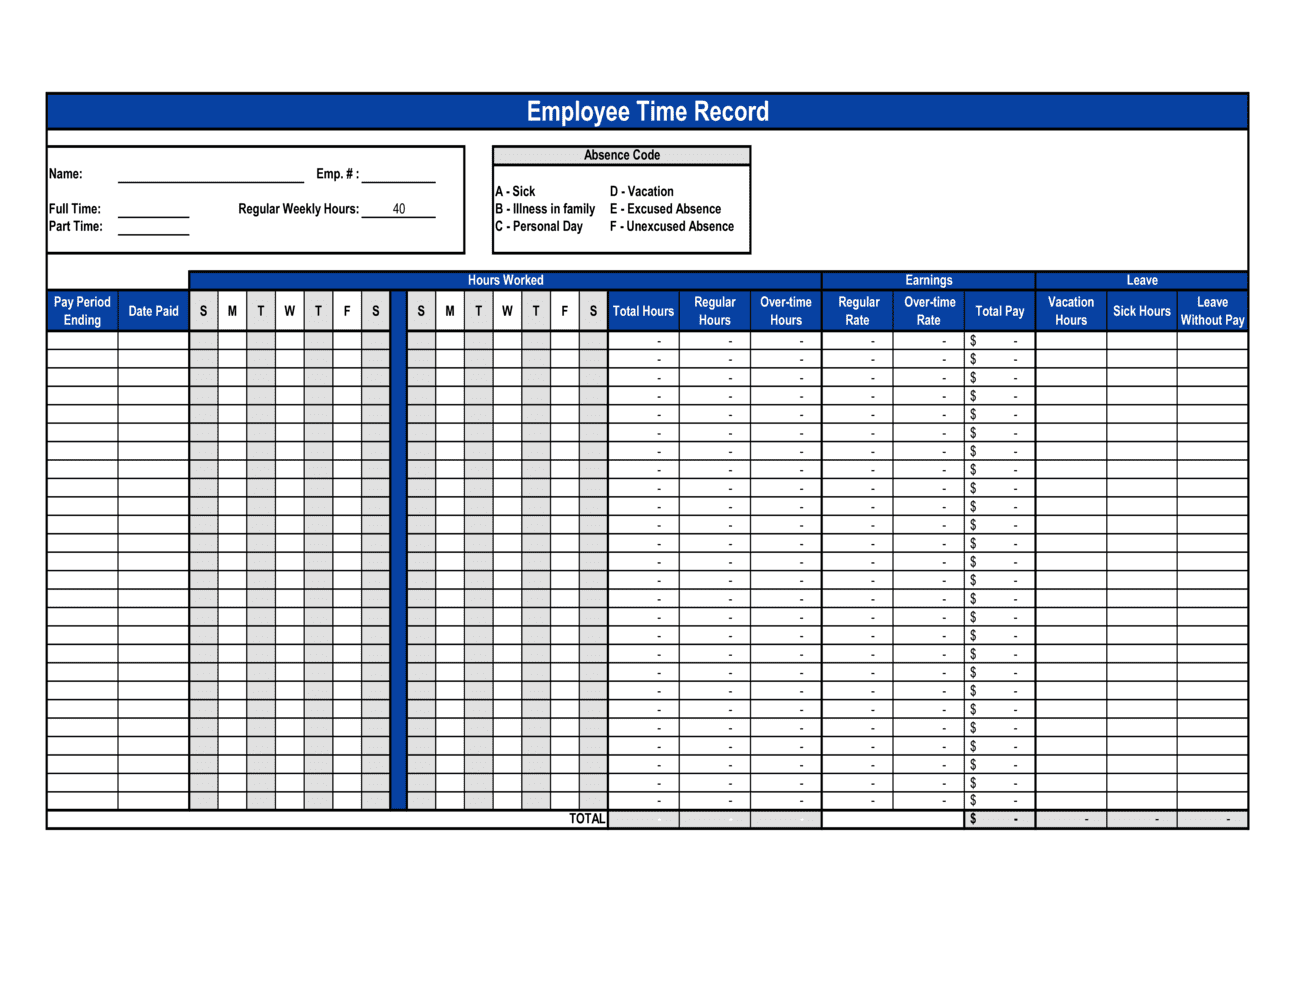 Employee Earnings Record Excel Template Database